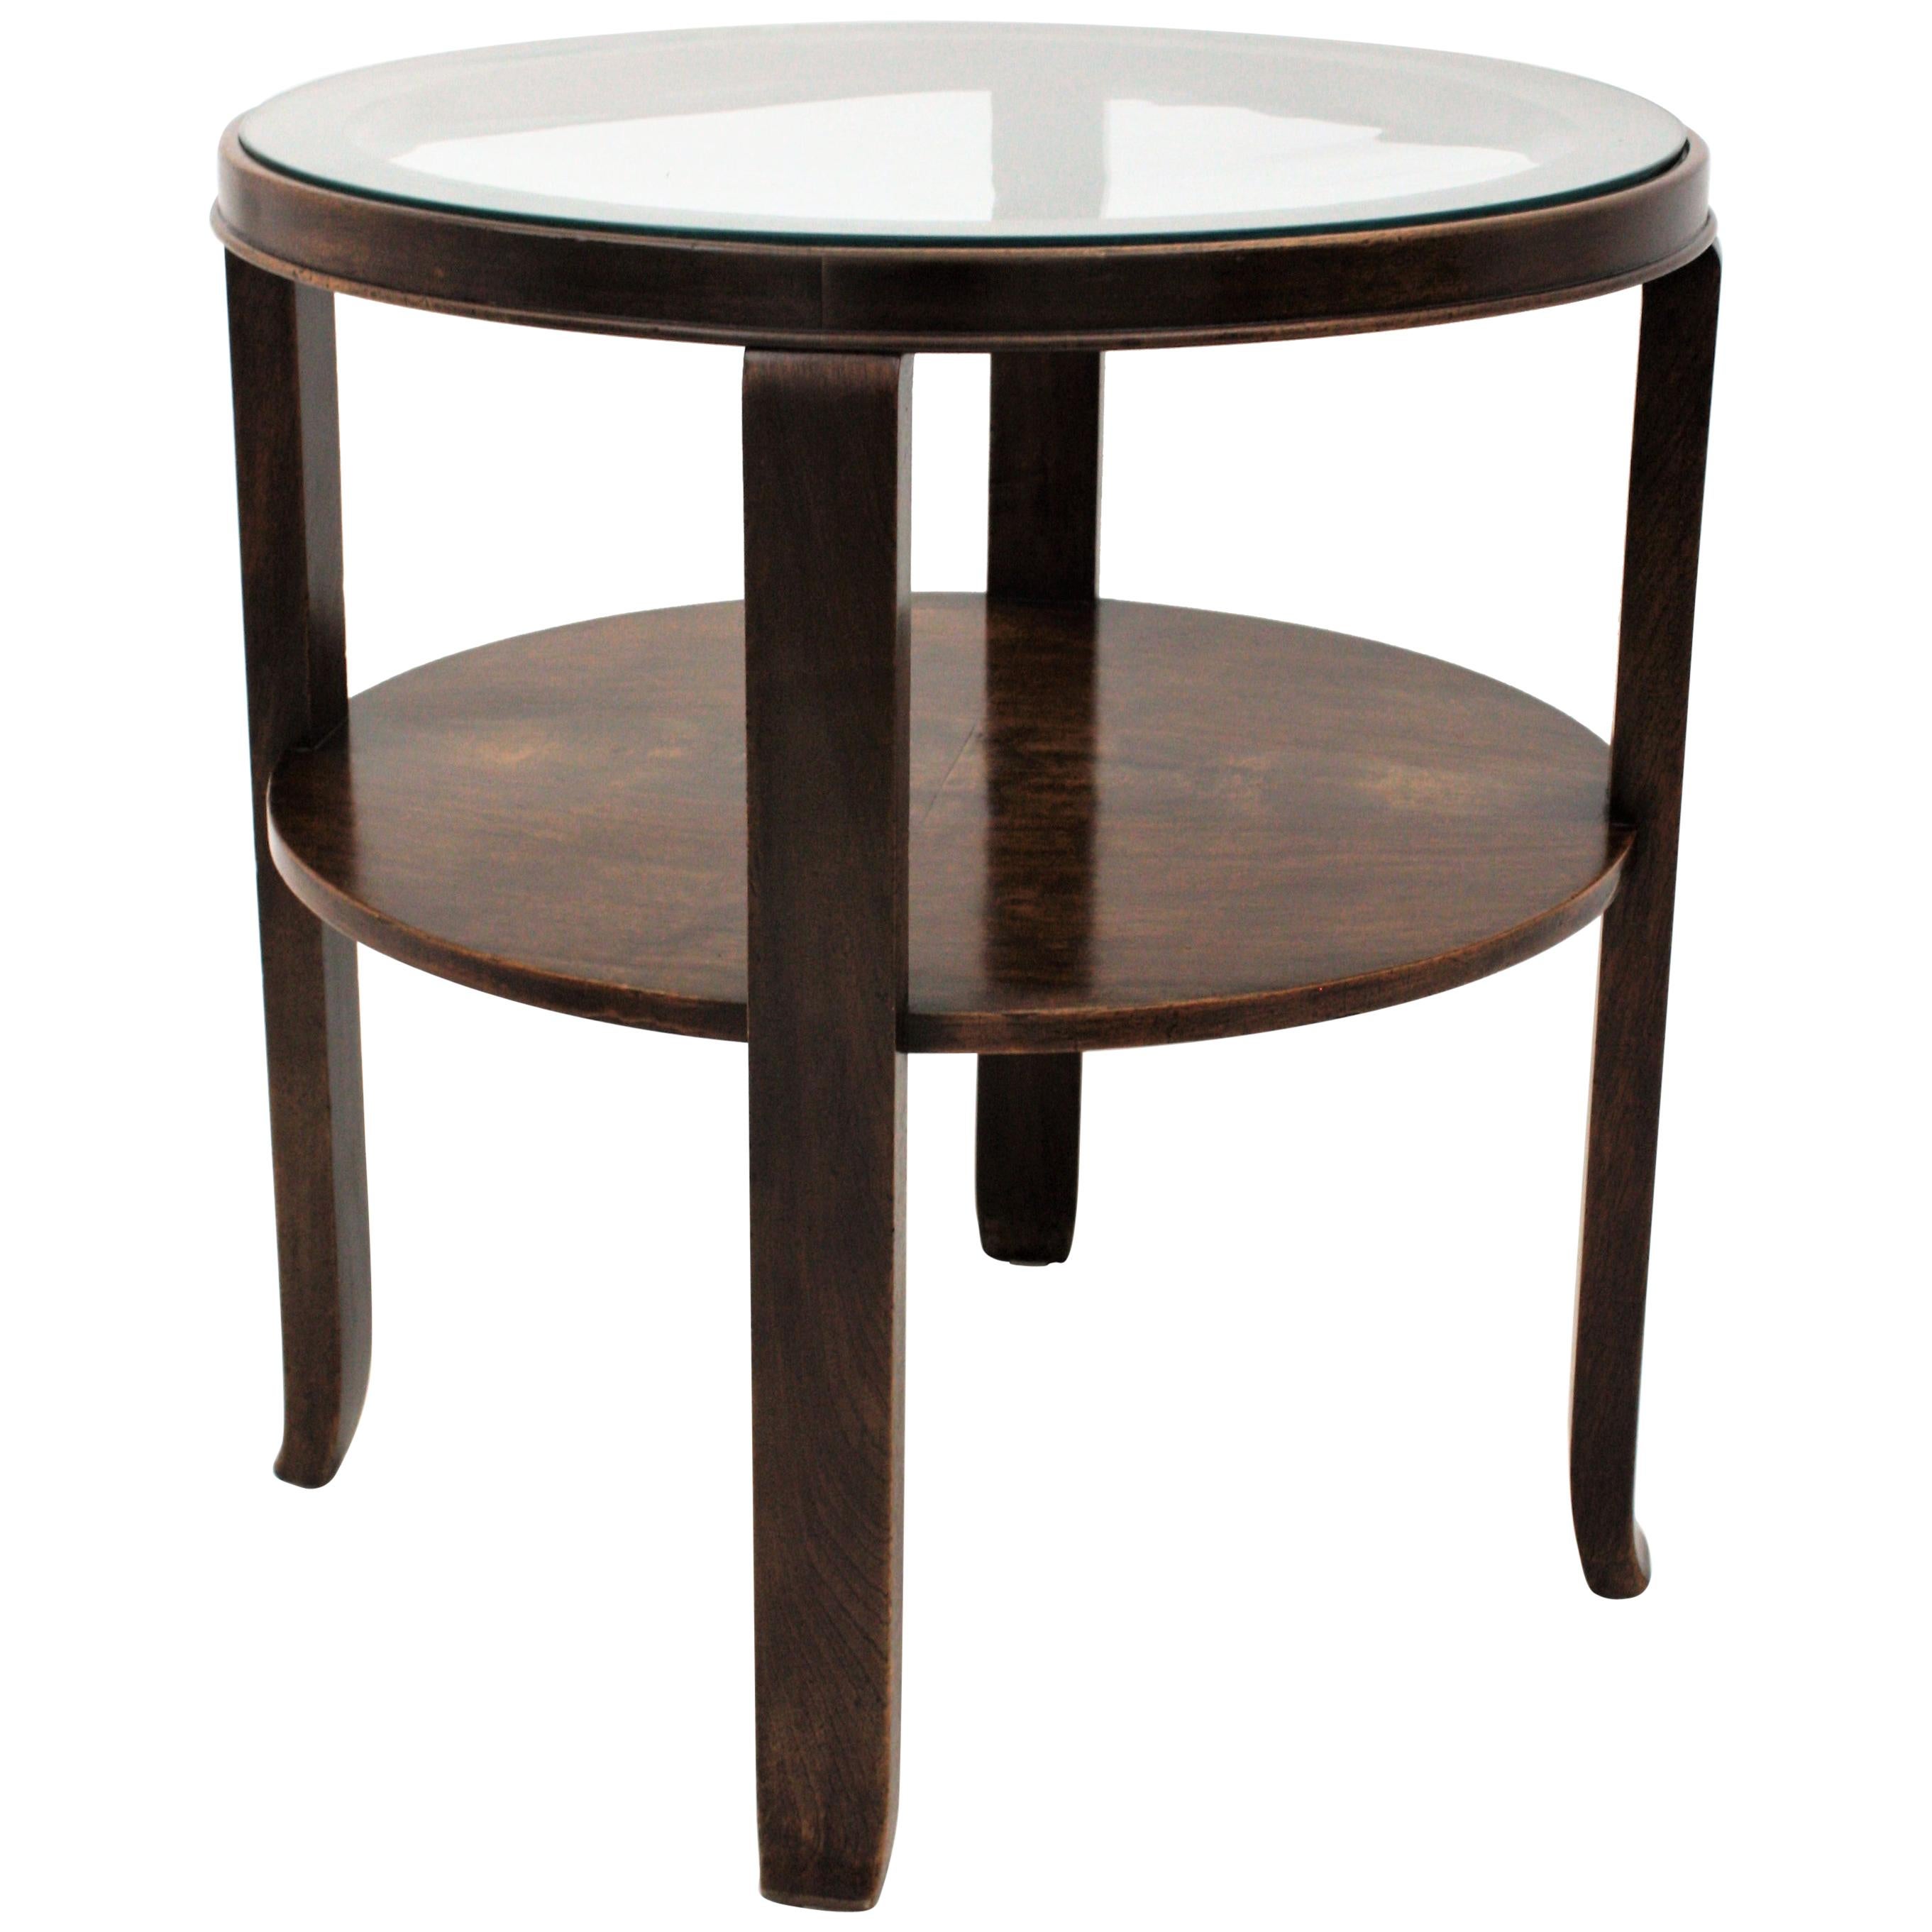 French Art Deco Two Level Coffee Table / Side Table in Walnut In Good Condition For Sale In Barcelona, ES